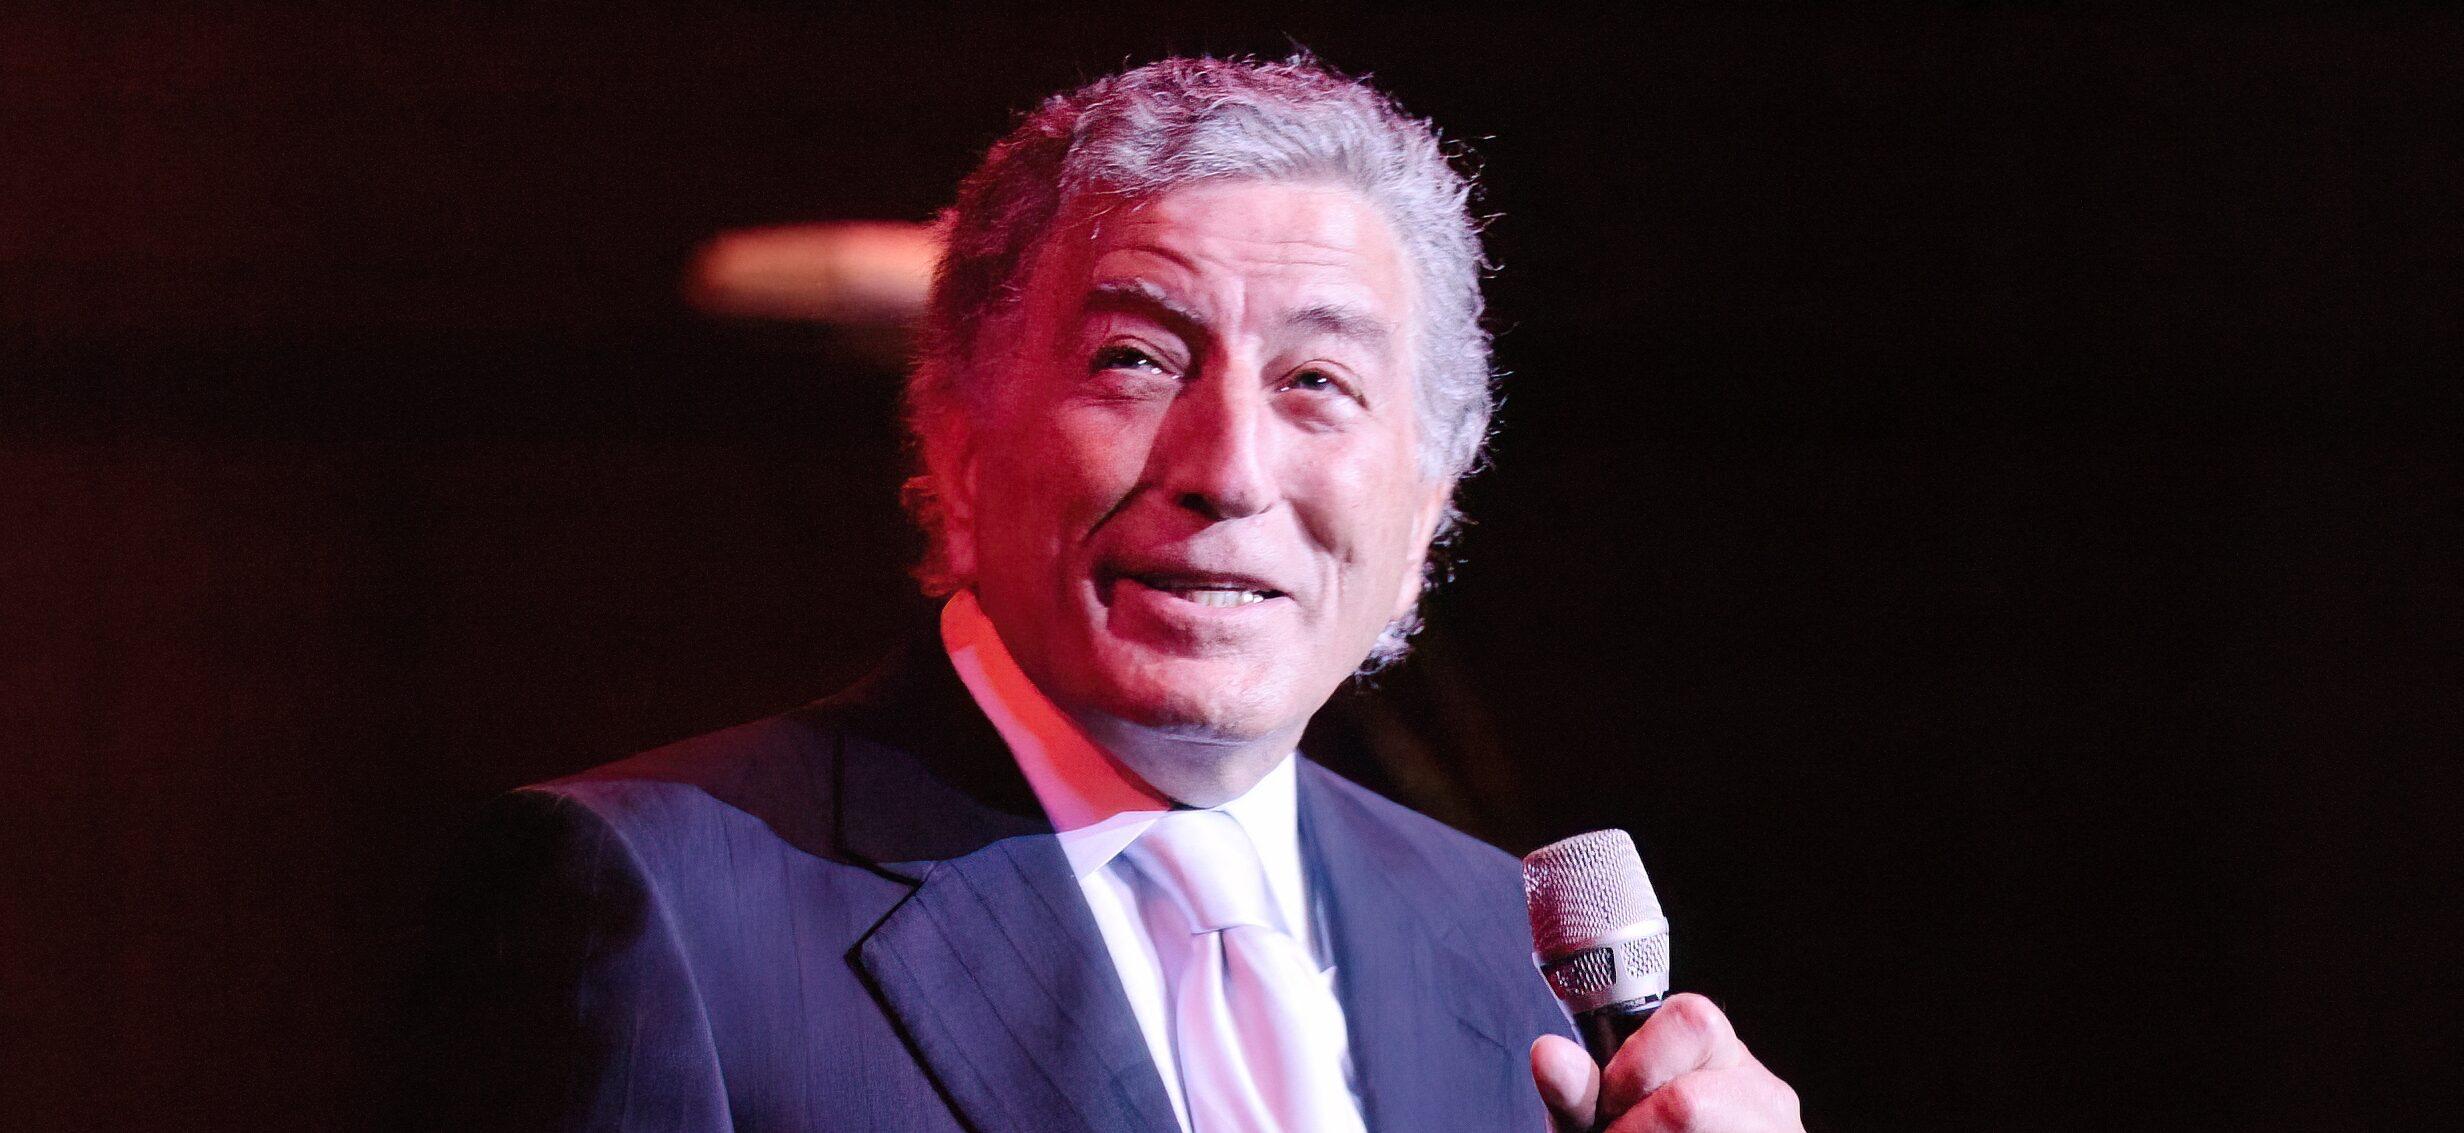 Celebrity Tributes To Tony Bennett Pour In After Singer’s Death At 96